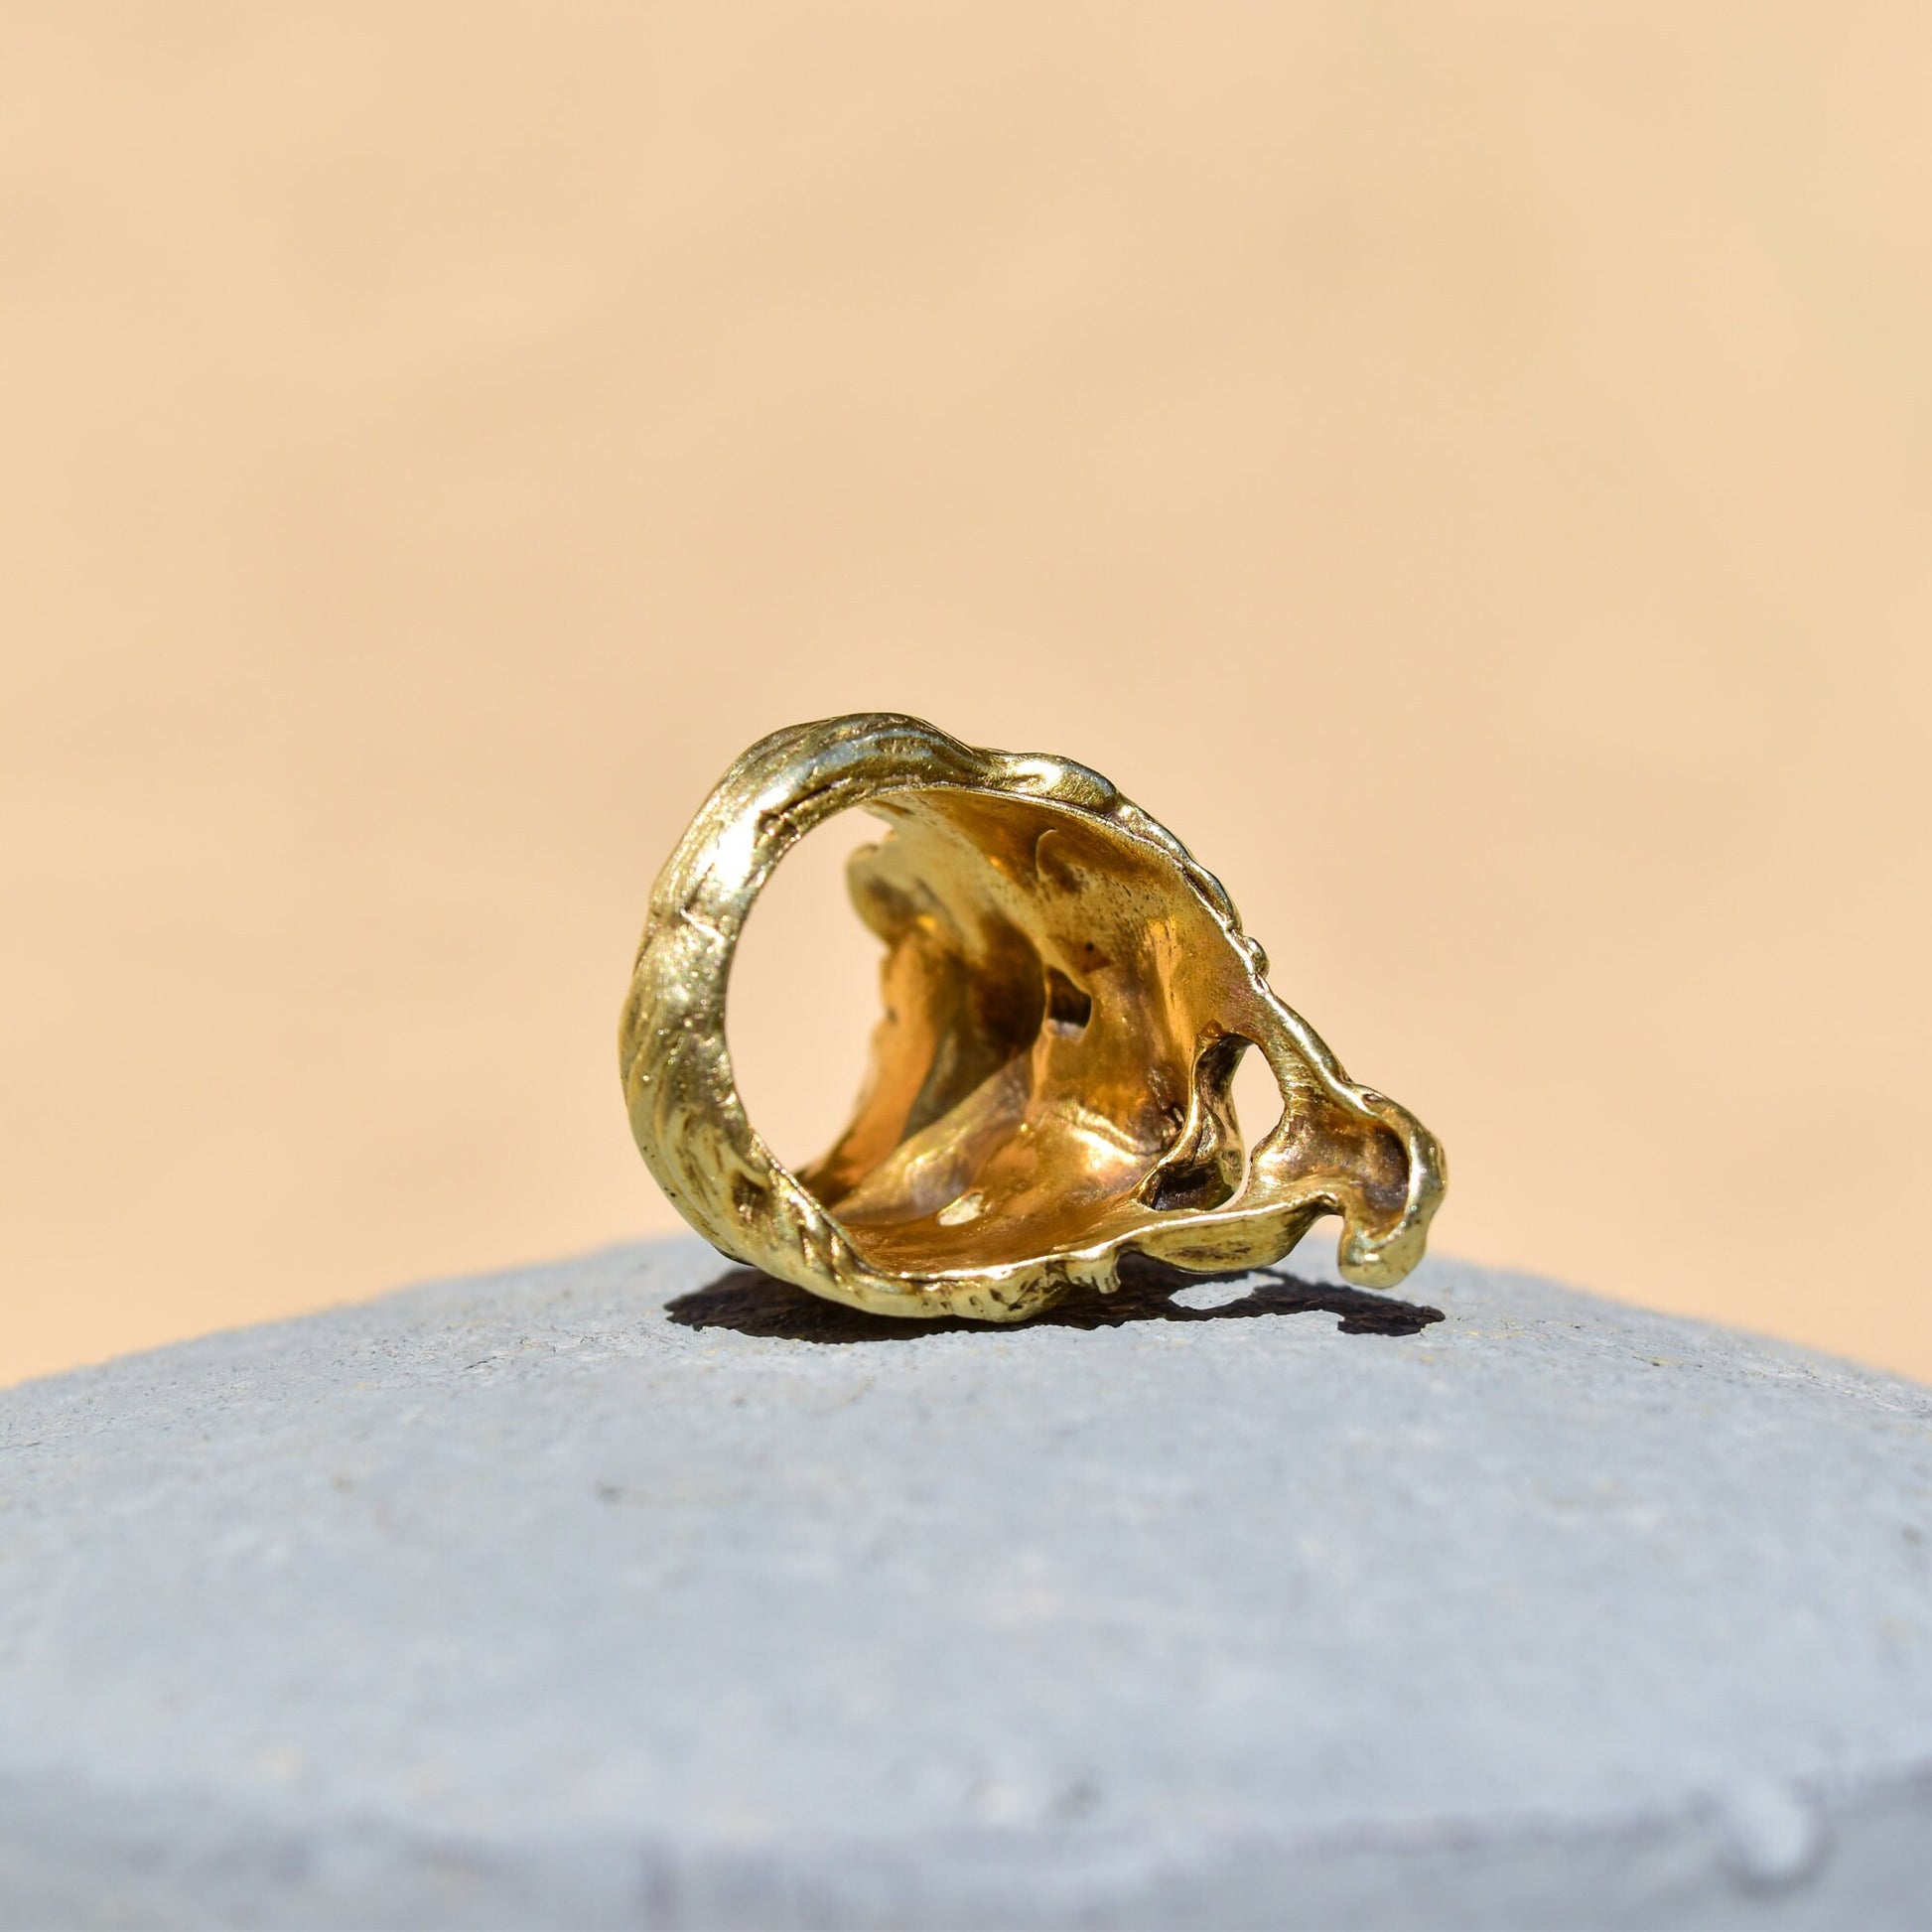 14K gold sculpted face ring with diamond eye, unique statement jewelry piece